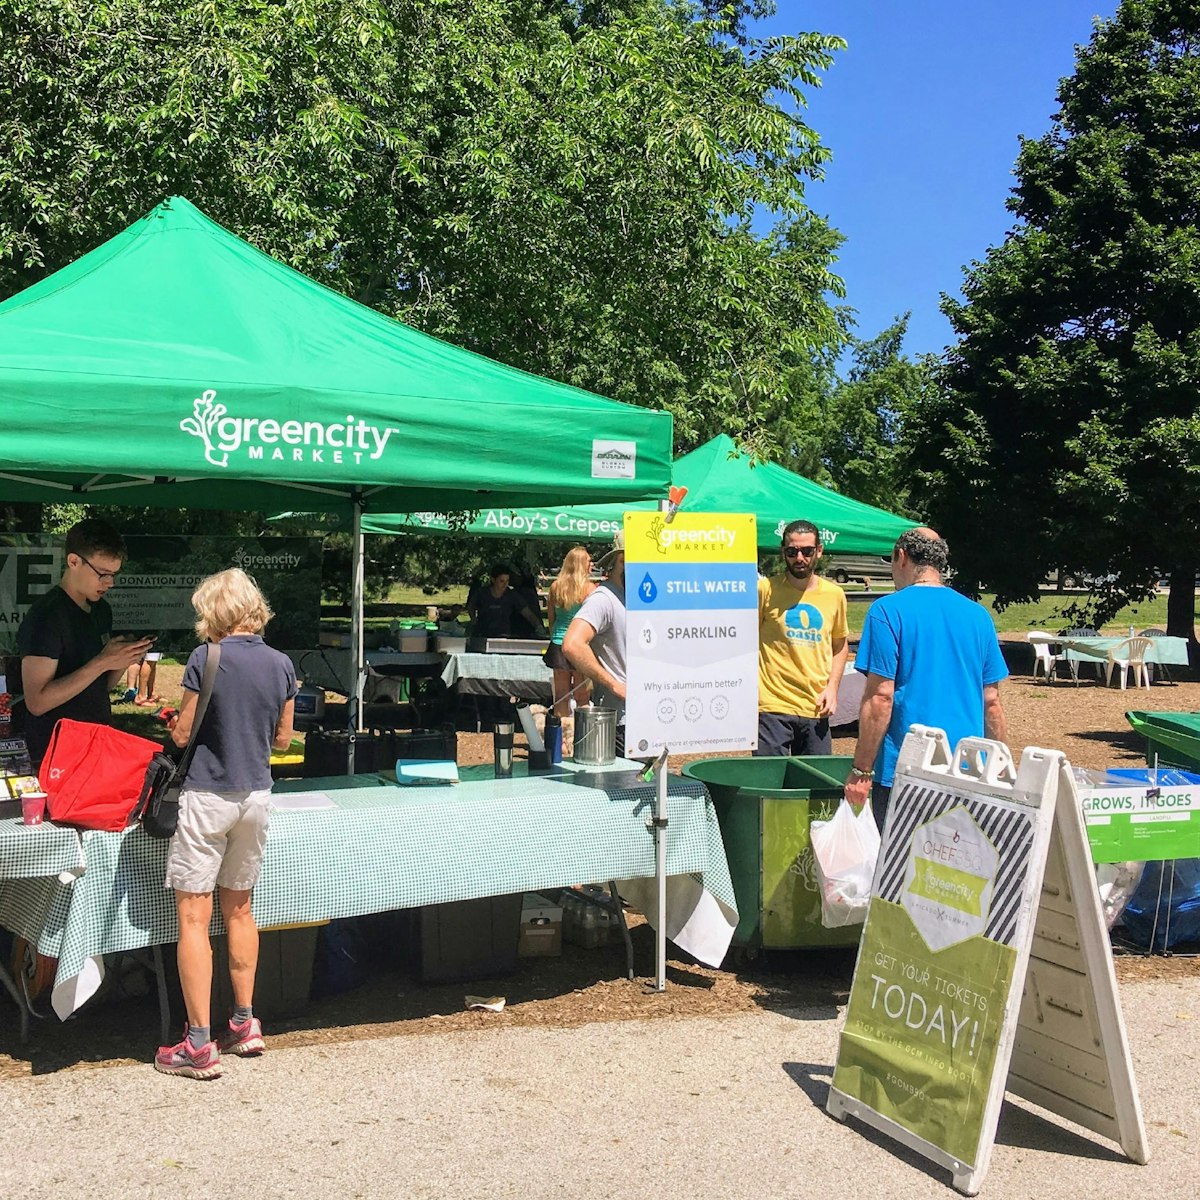 Green City Market has been supplying Lincoln Park with responsibly-produced foods since 1998.